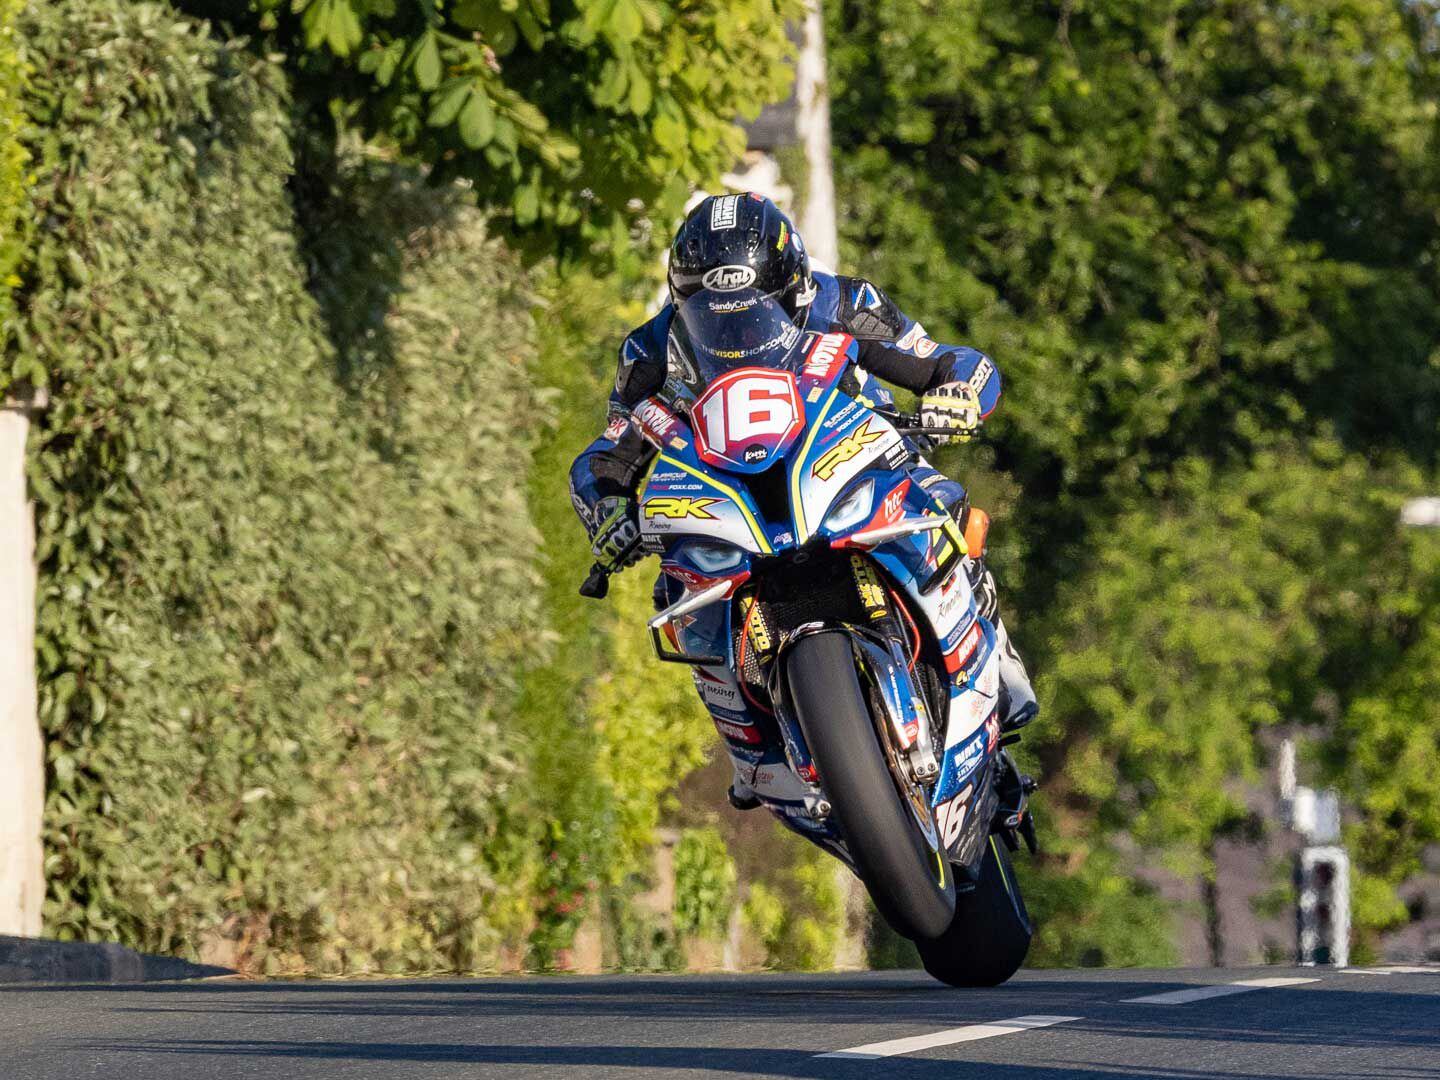 Mike Browne, who first competed at the TT in 2019 and has had seven prior starts, started all eight solo races for 2023. Evening practice on his BMW M 1000 RR Superstock. Browne finished second in the Supertwin race aboard his Paton S1-R.